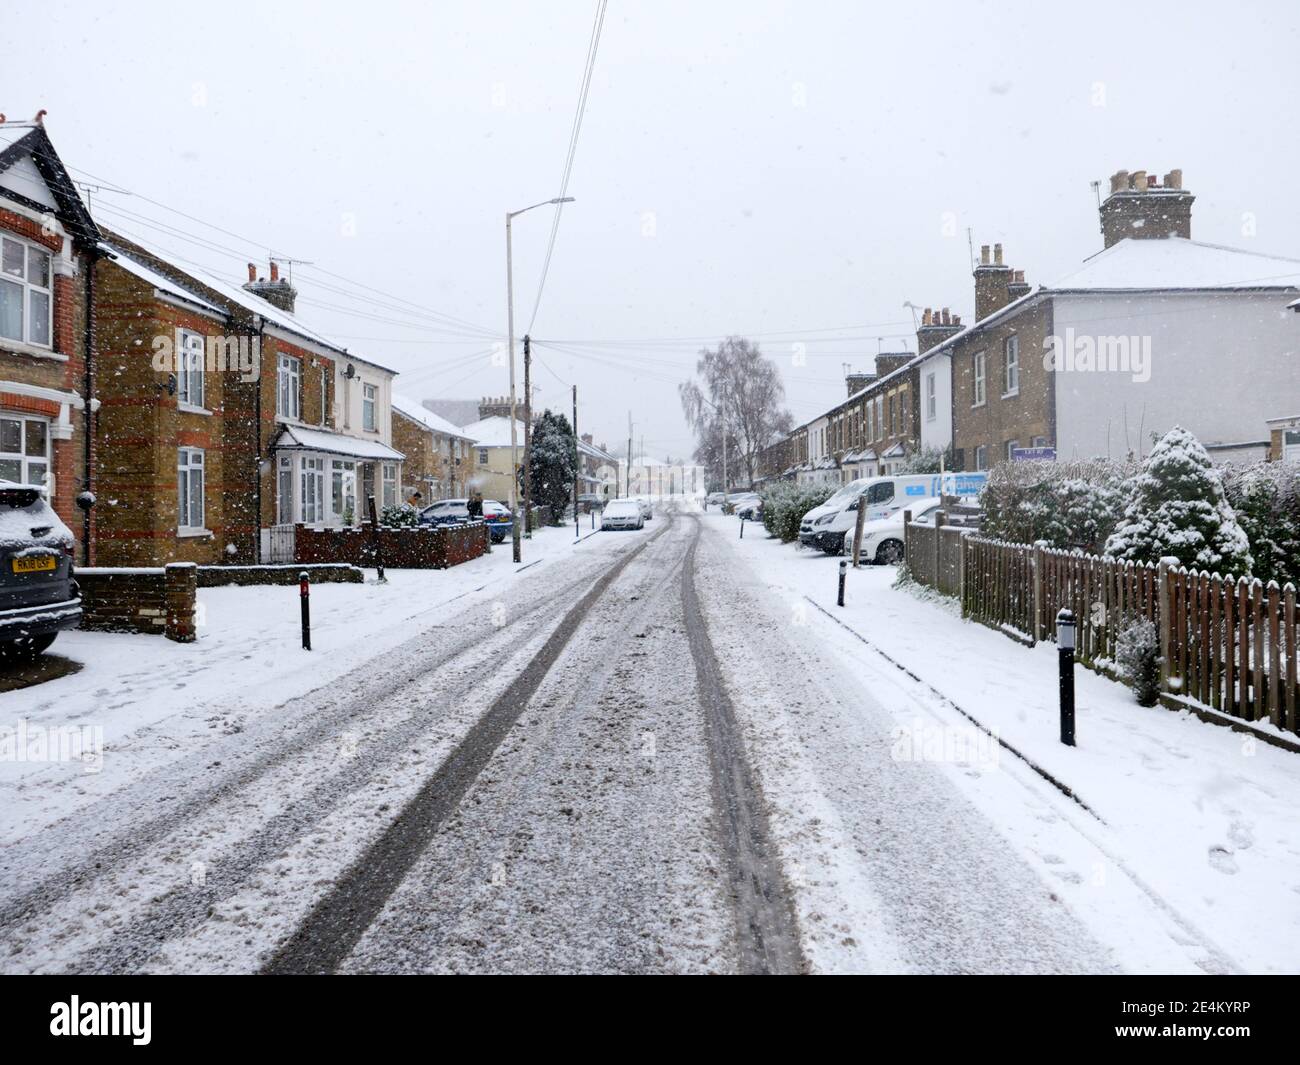 After sweeping cross the UK the snow has finally fallen on London the first  time this Winter . London residents woke up this morning to a flurries of  snow all over the